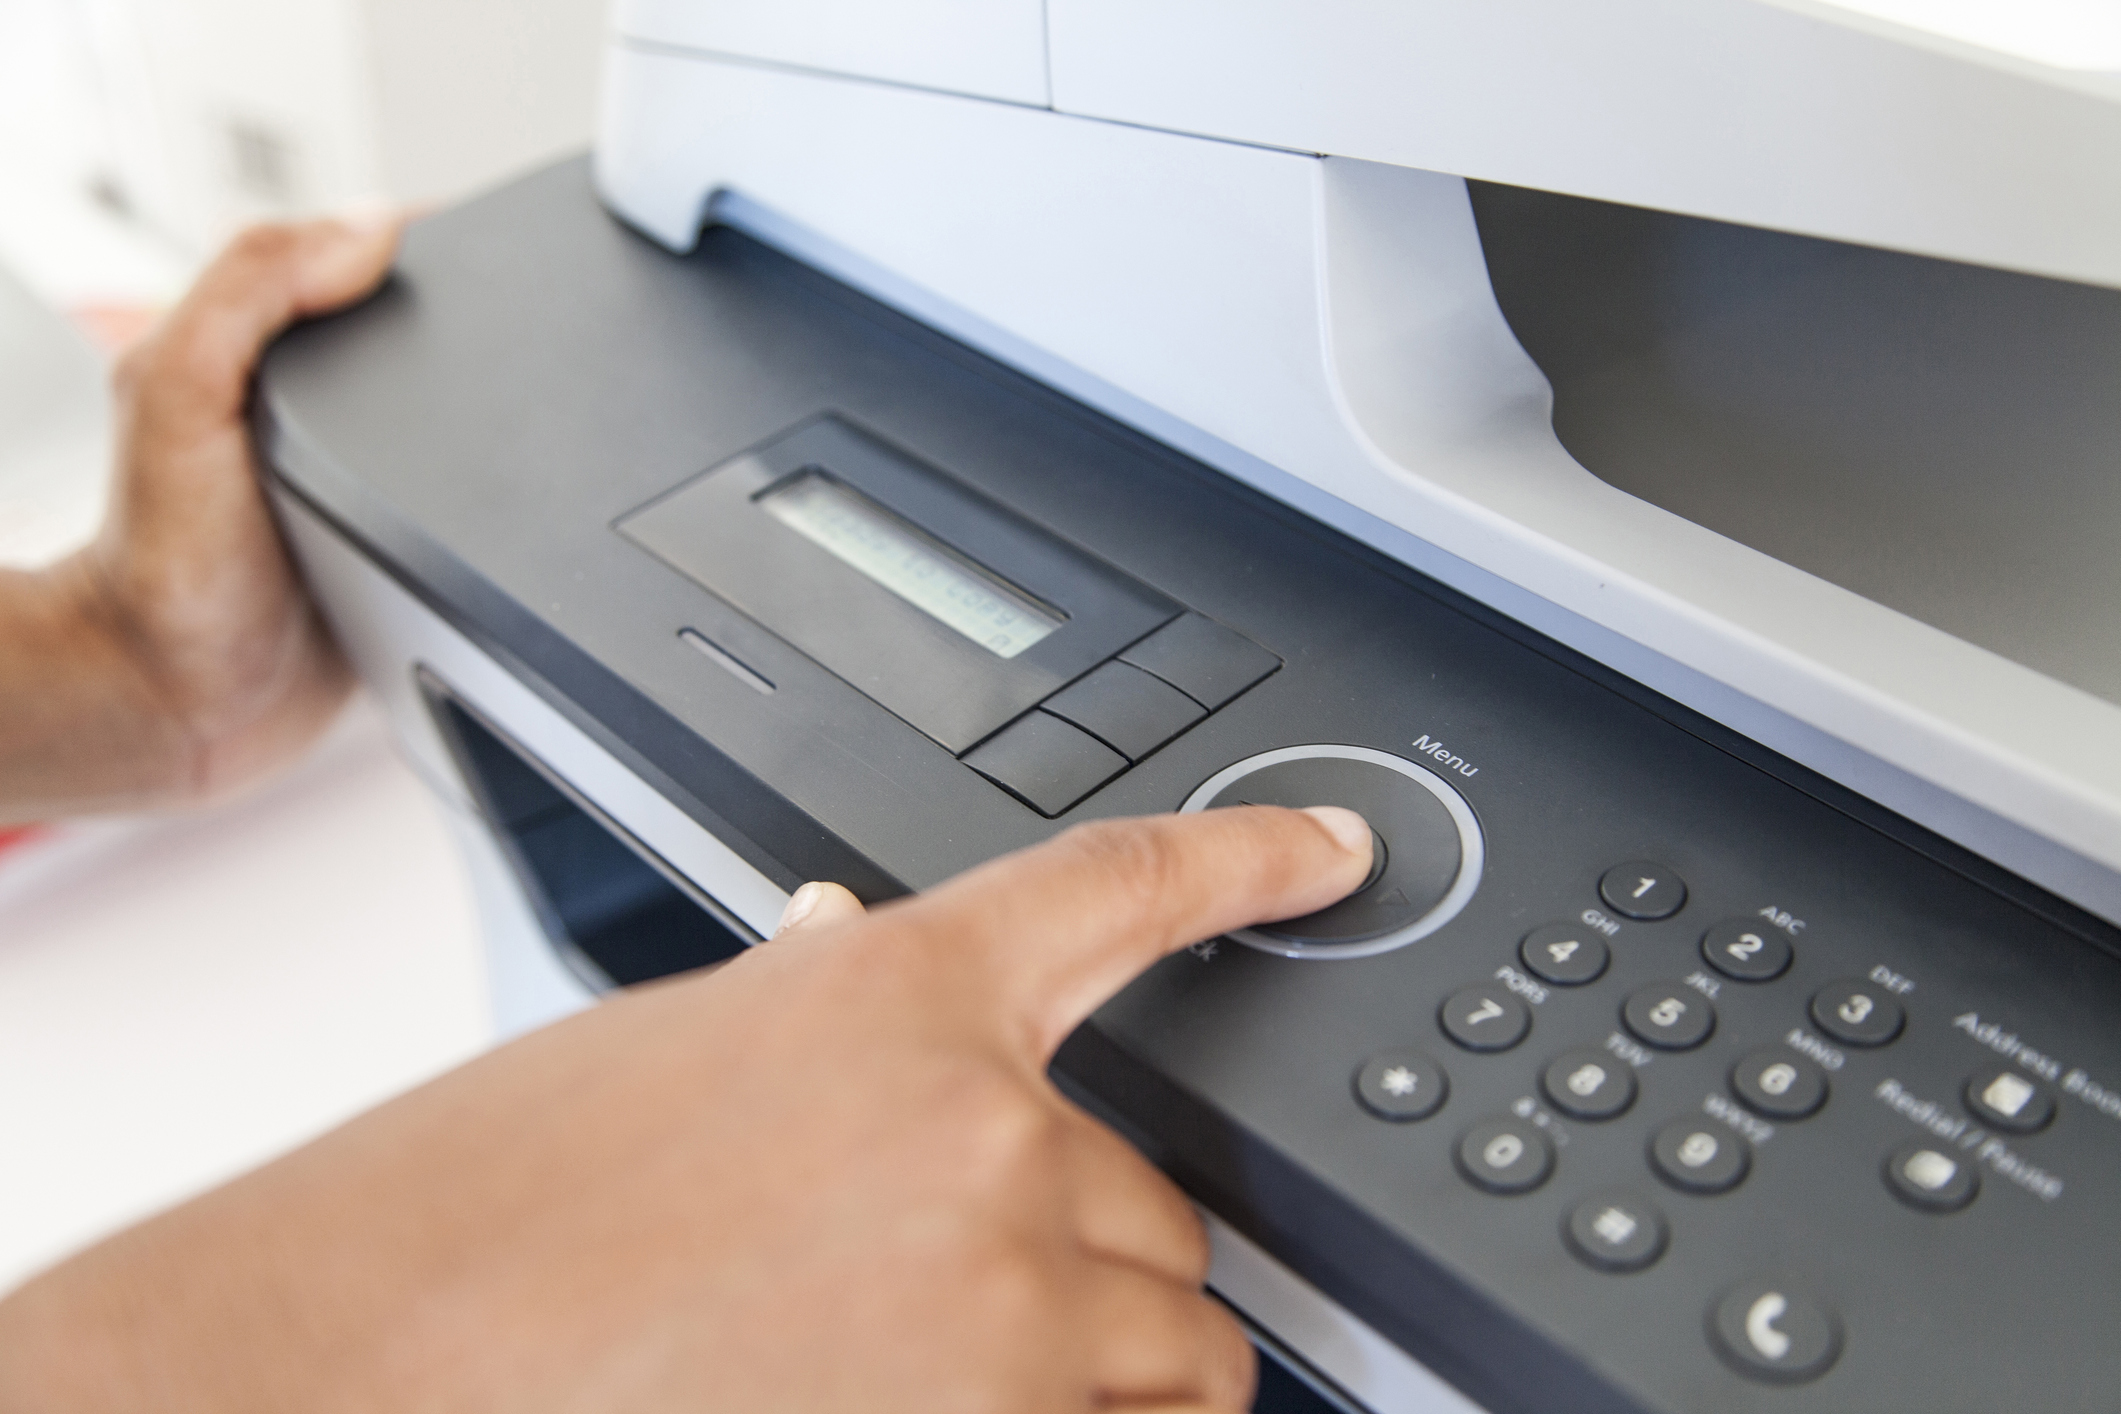 Multifunction Printer - Clear Choice Technical Services